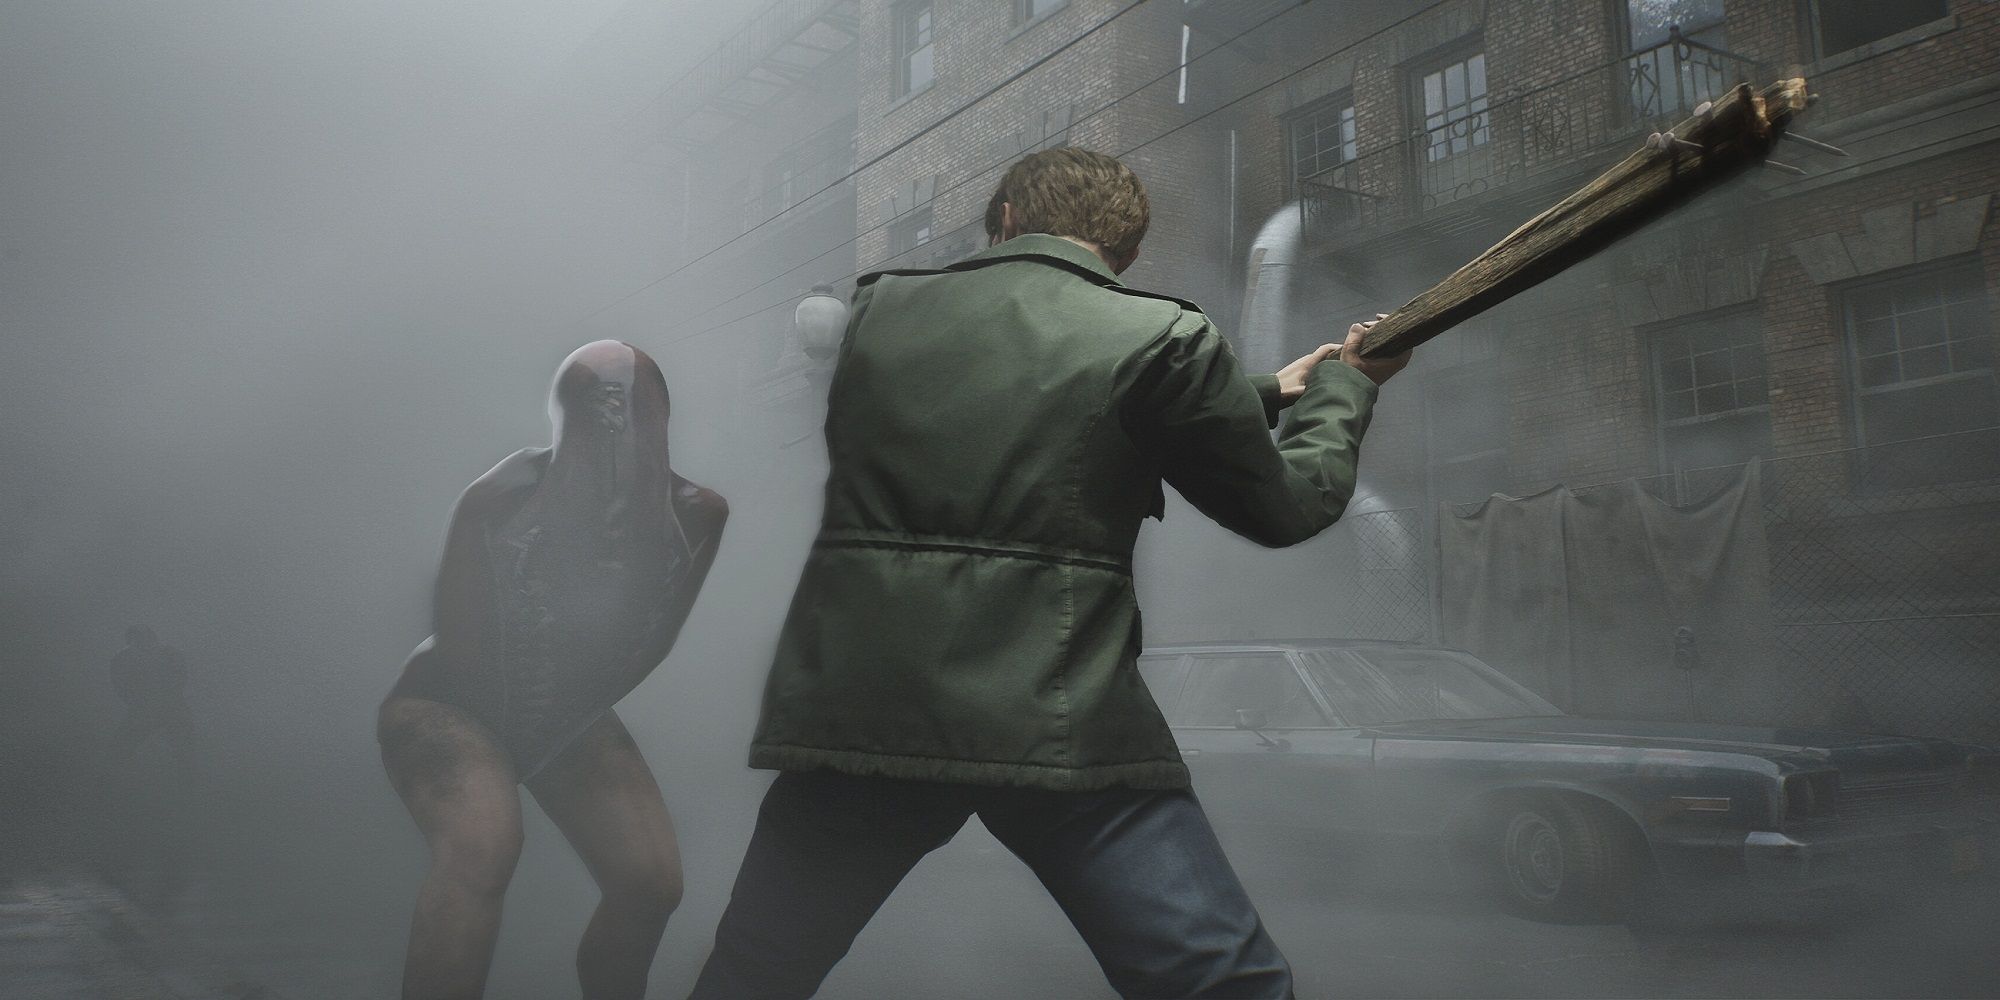 Silent Hill 2 Remake Announced; Will Come to PlayStation and PC [UPDATE]